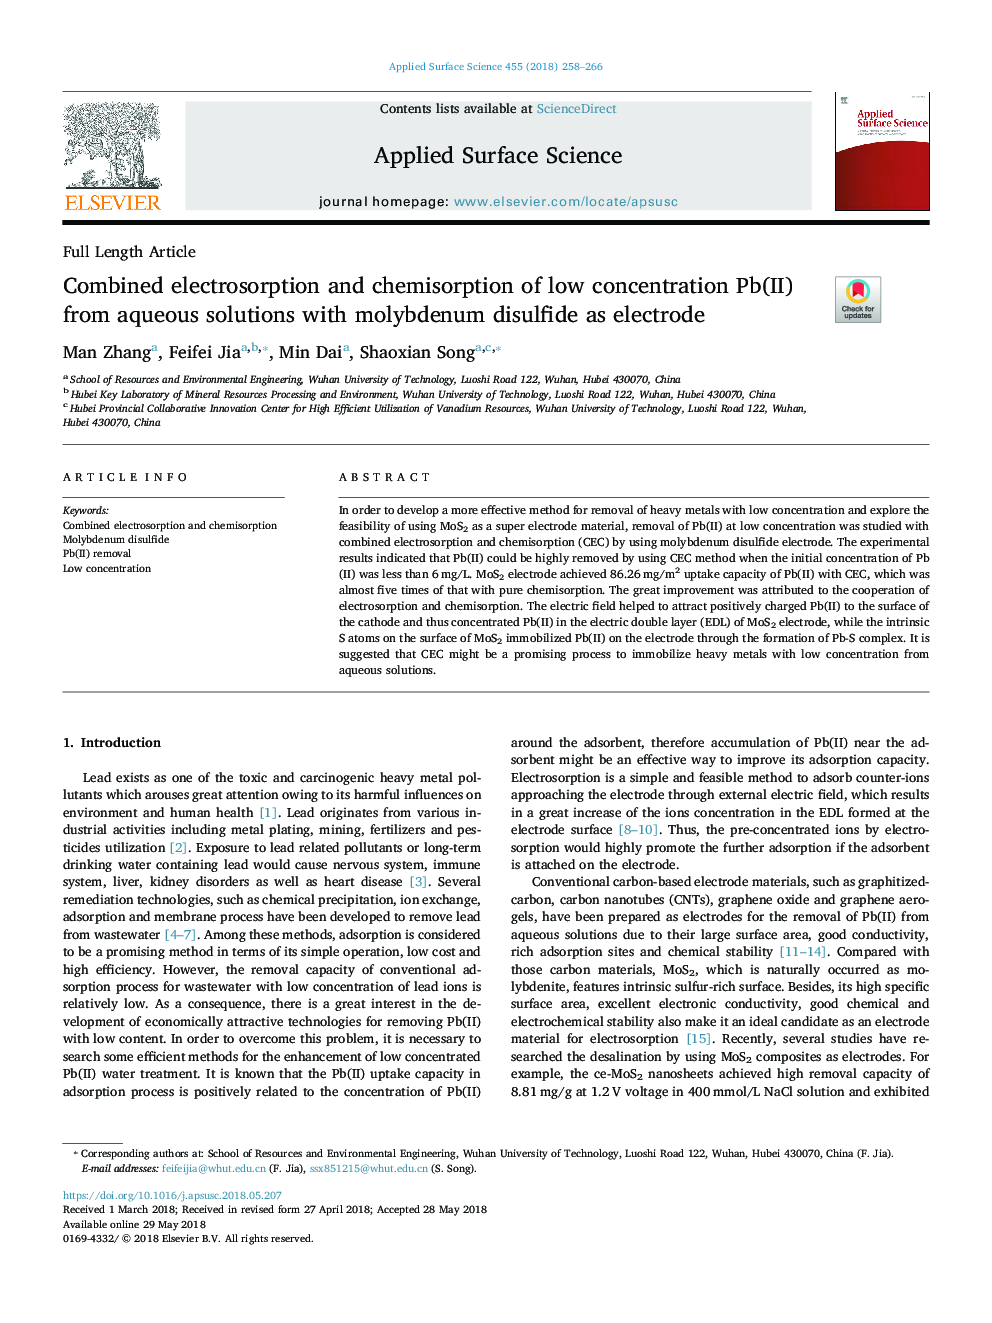 Combined electrosorption and chemisorption of low concentration Pb(II) from aqueous solutions with molybdenum disulfide as electrode